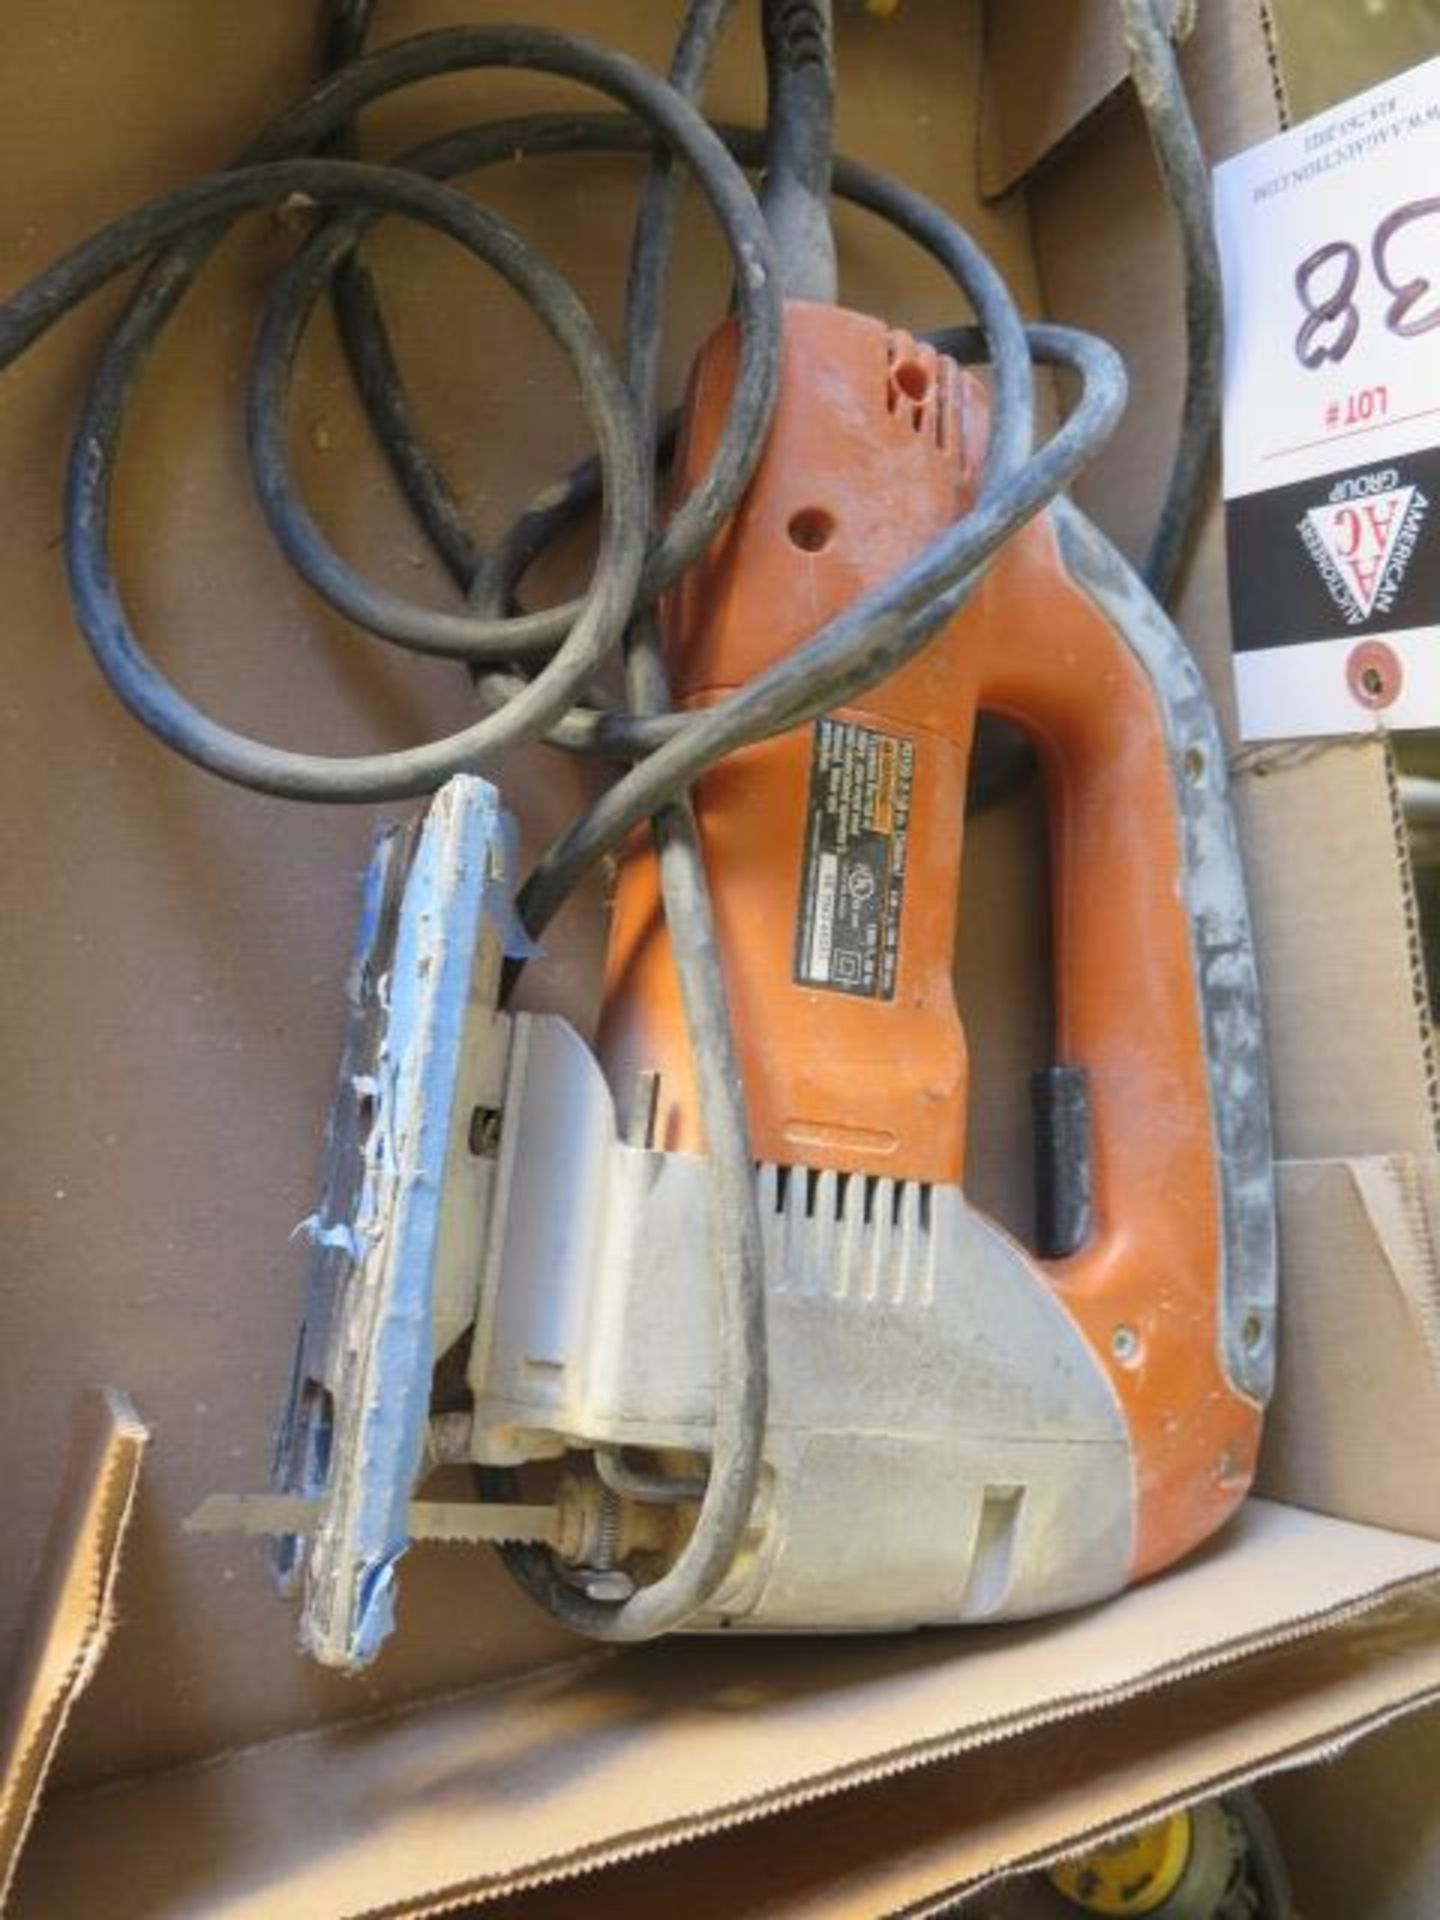 Ridgid Jig Saw and Chicago Multi-Function Power Tool (SOLD AS-IS - NO WARRANTY) - Image 3 of 4